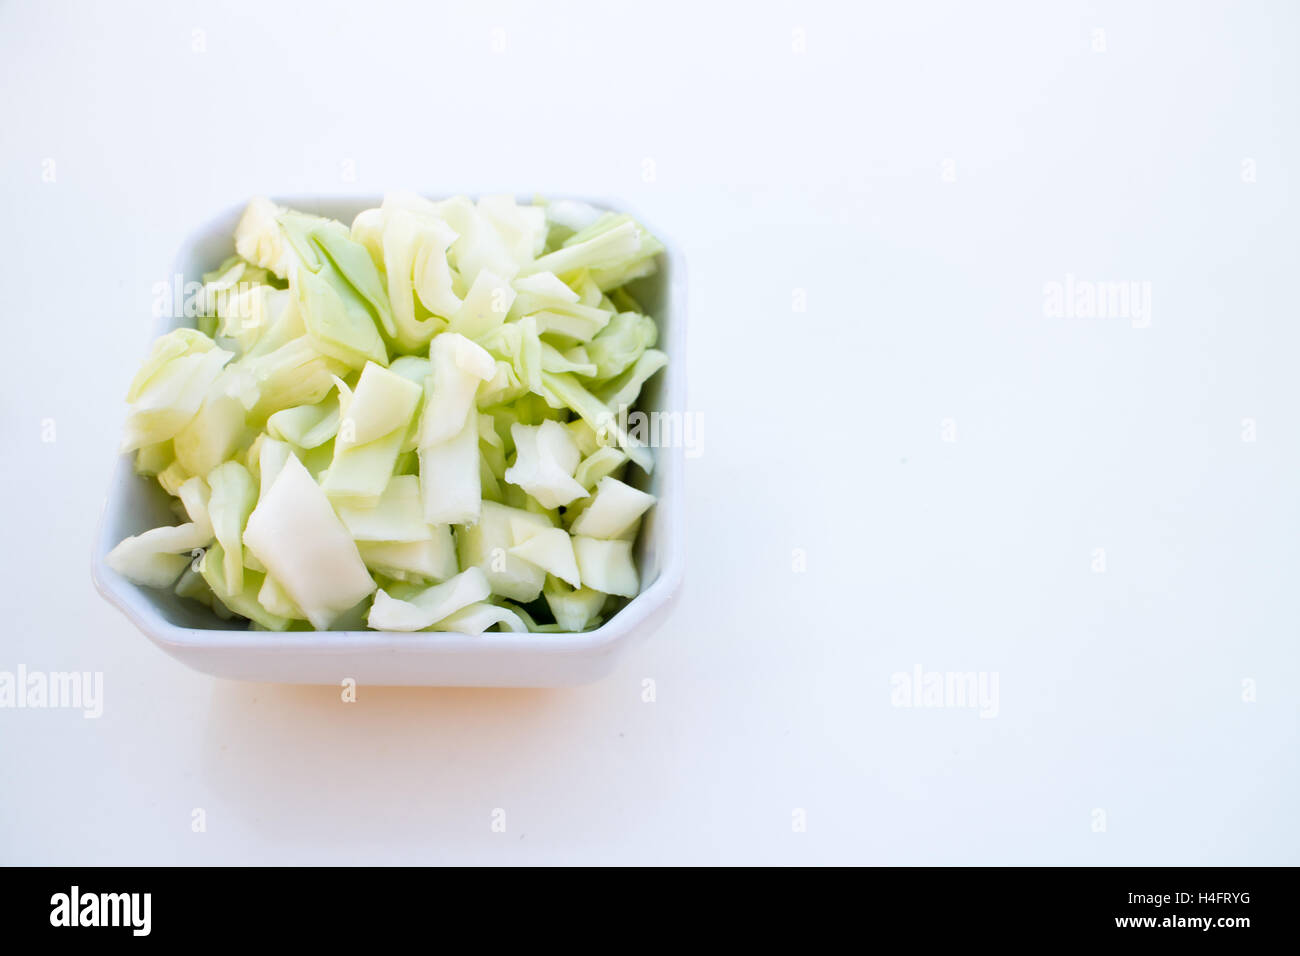 Green cabbage chopped up in a bowl ready to be used, food inspired Stock Photo